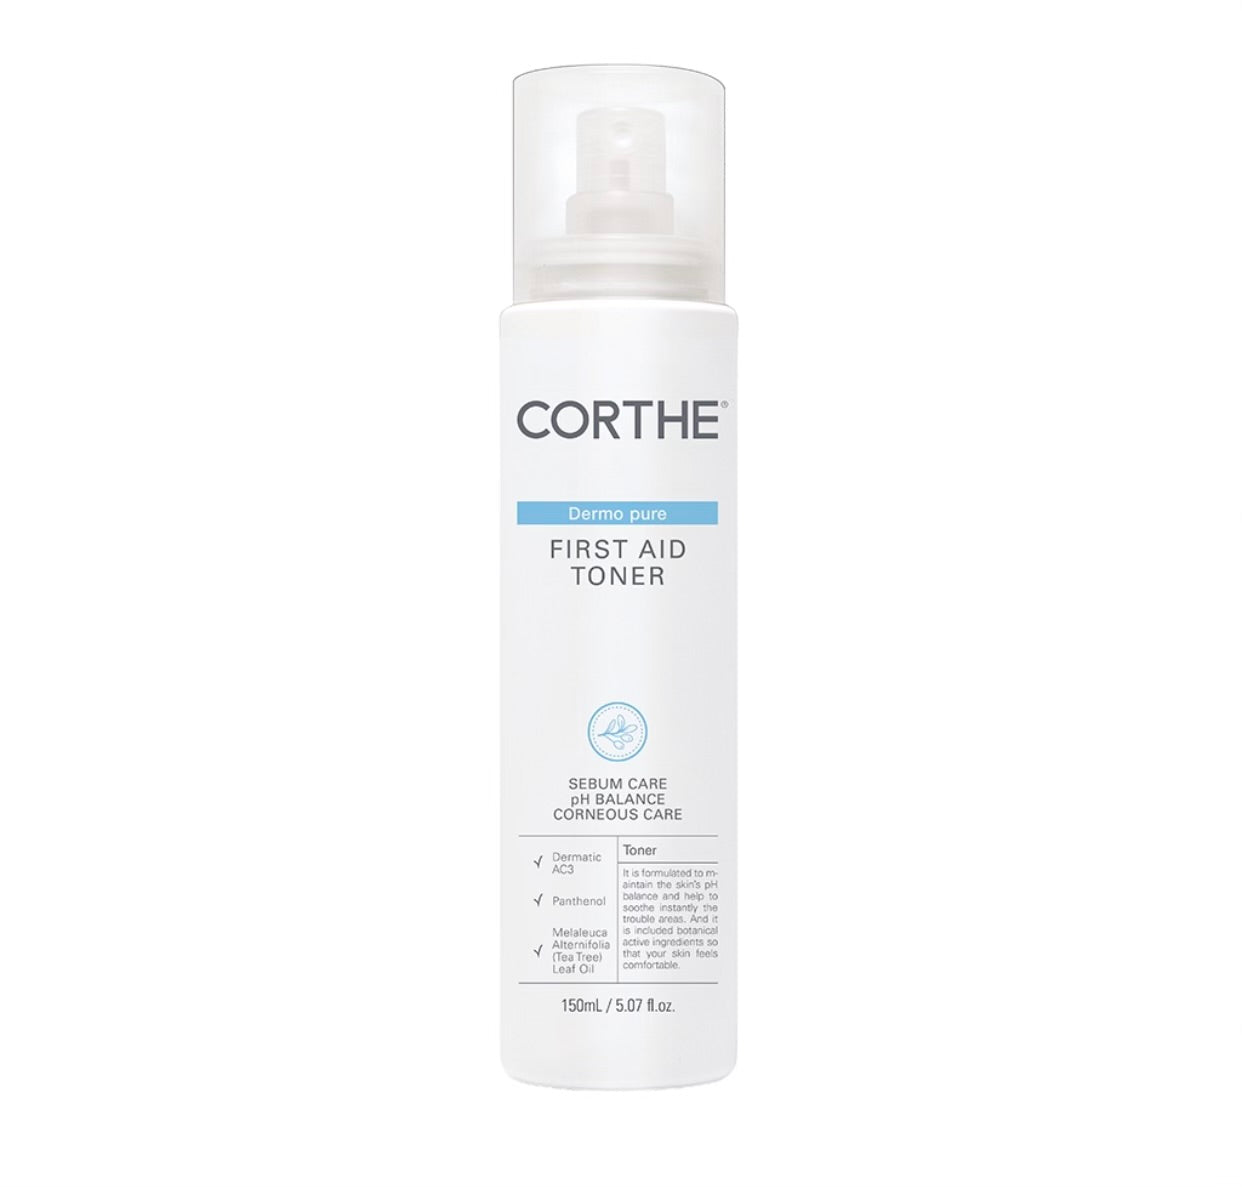 Corthe Dermo Pure First Aid Toner